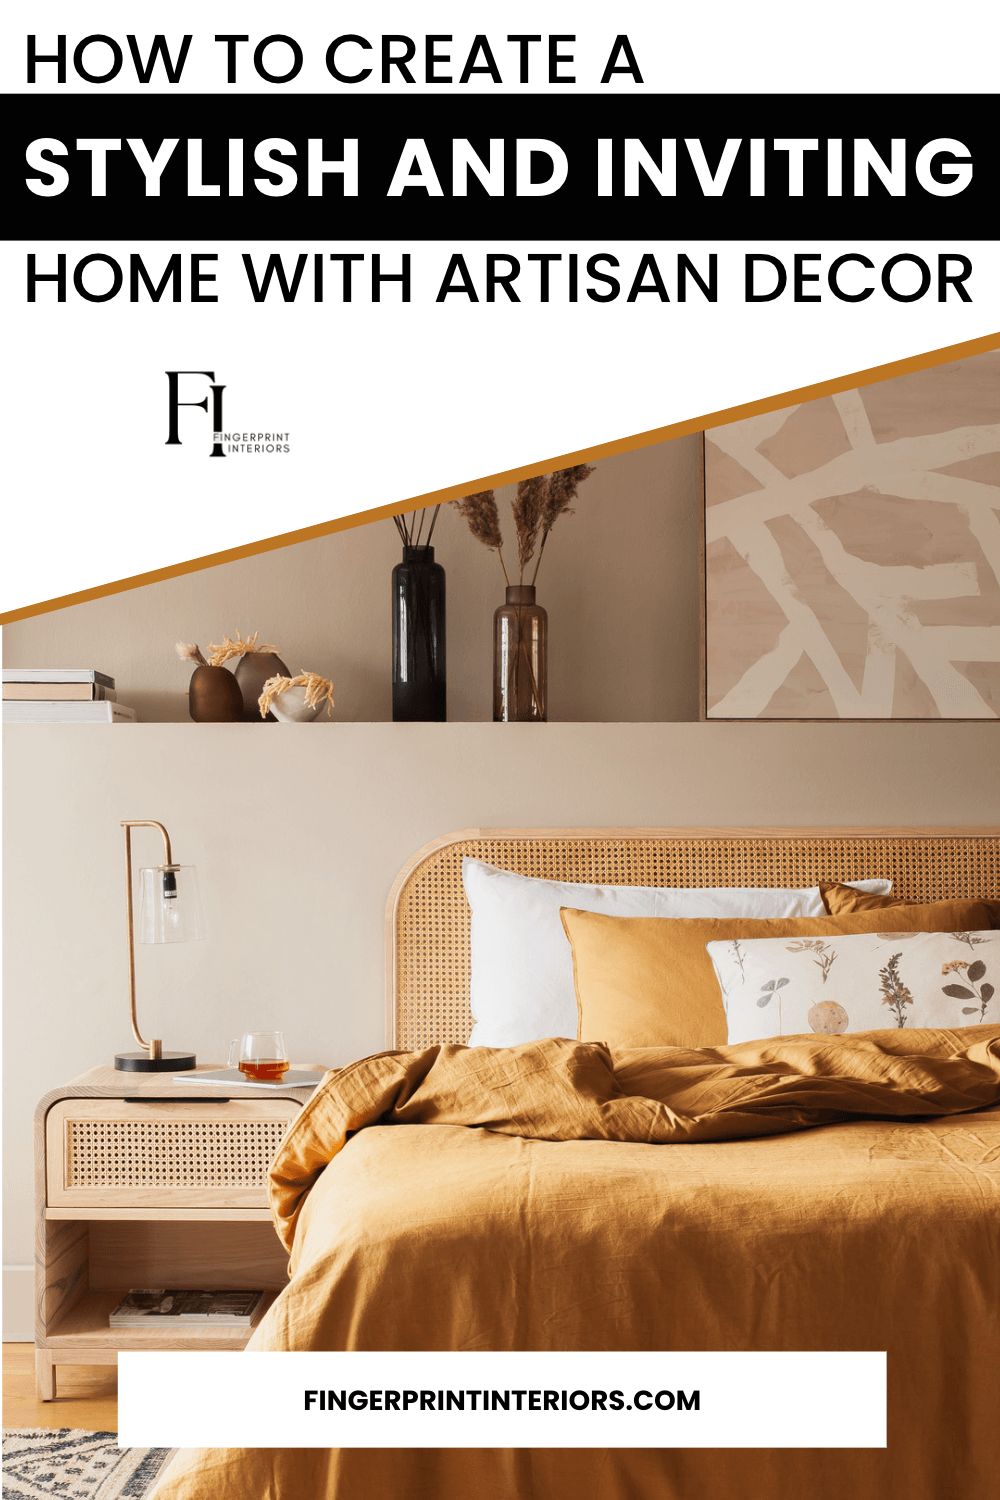 How to create a stylish and inviting home with artisan decor - Fingerprint Interiors